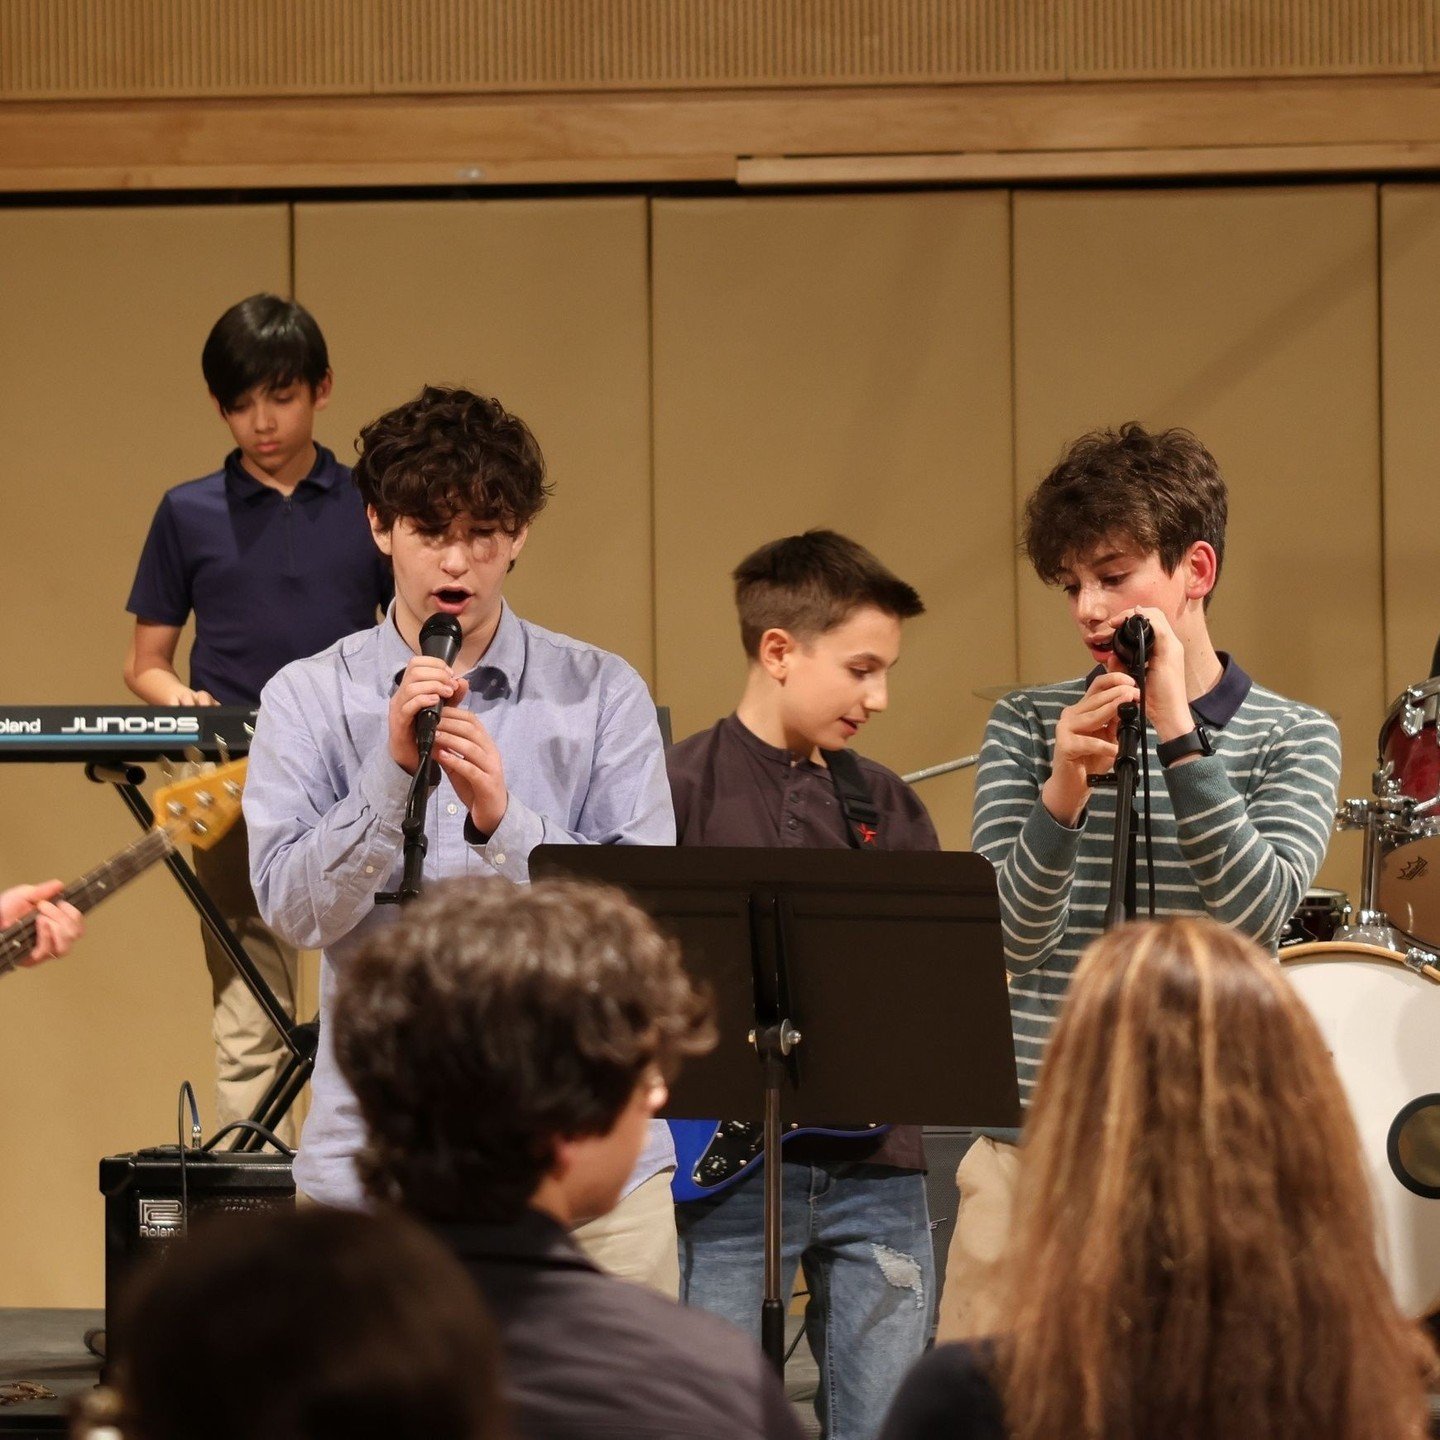 At our yearend Coffeehouse, our community rocked out with the most bands ever! From Grade 5 to Grade 12, our lineup jammed to classics like Journey's &quot;Don't Stop Believin'&quot; and AC/DC's &quot;Highway to Hell,&quot; along with modern hits lik